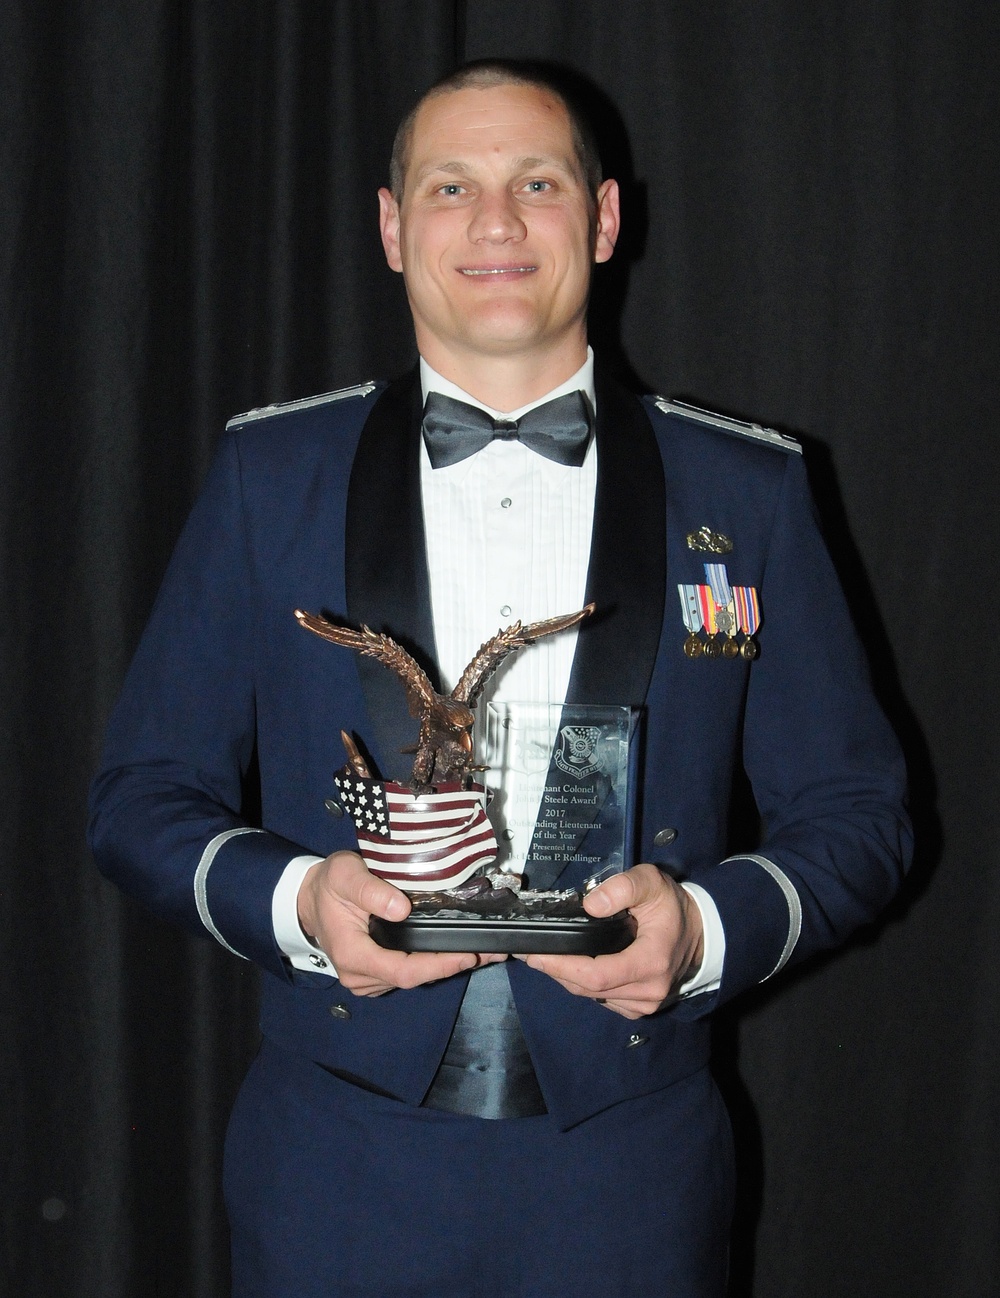 SD National Guard selects Lieutenant of the Year